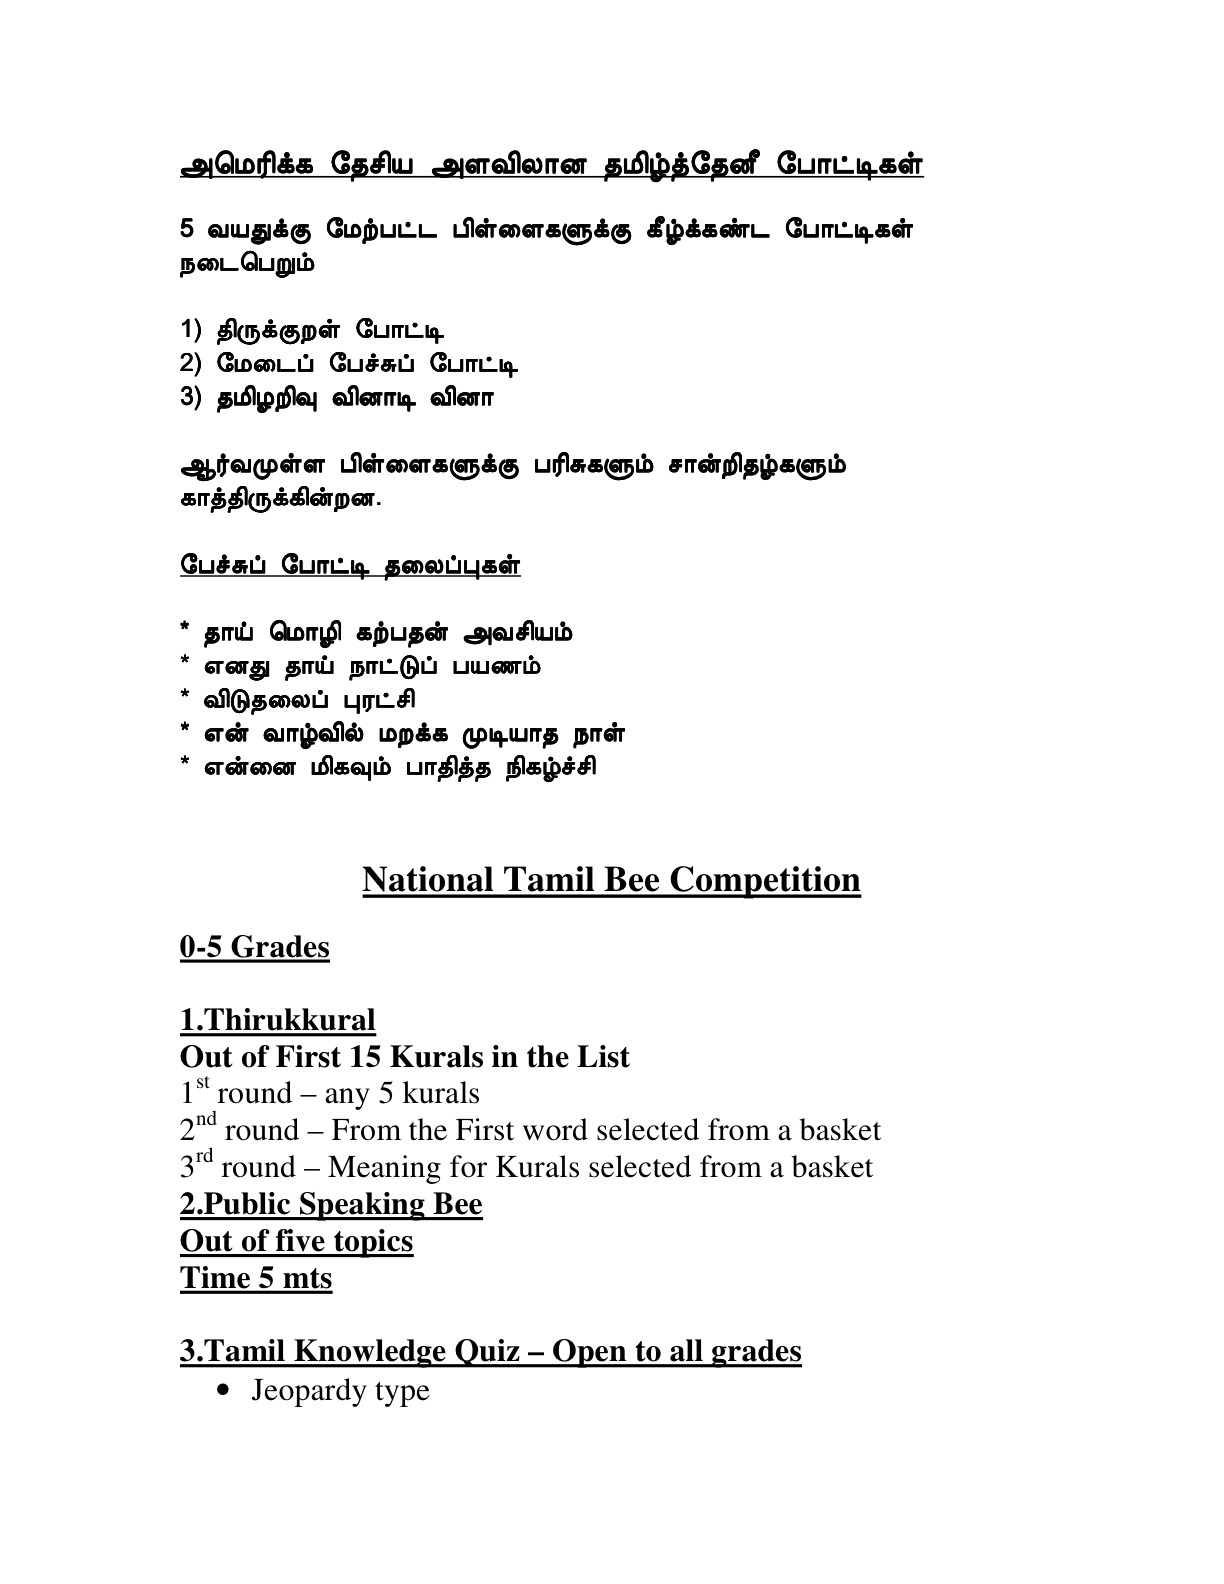 [National+Tamil+Bee+Competition+.jpg]